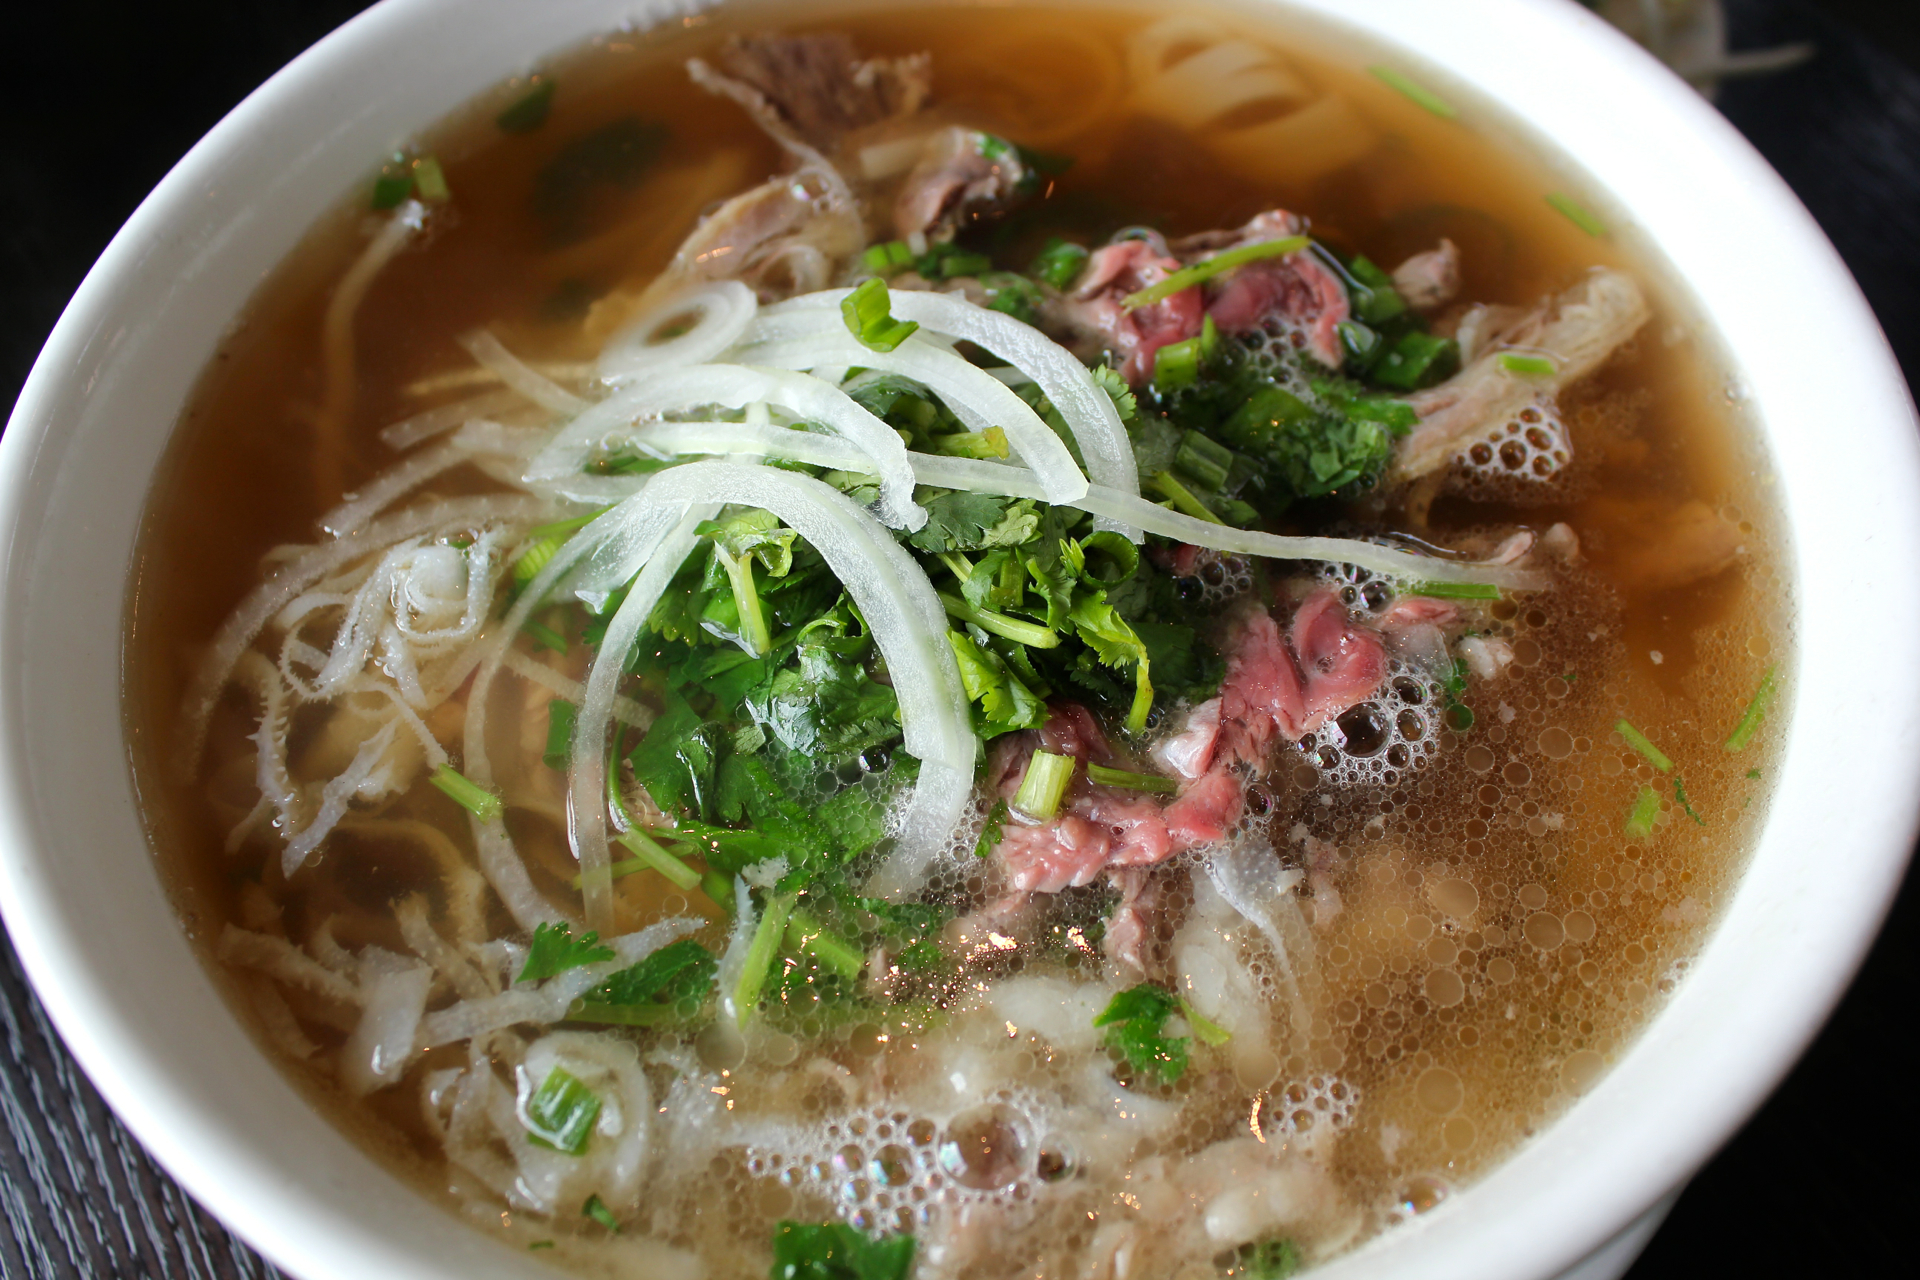 Pho dac biet at Pho Factory with rare filet mignon, well-done flank, brisket, tendon and tripe.